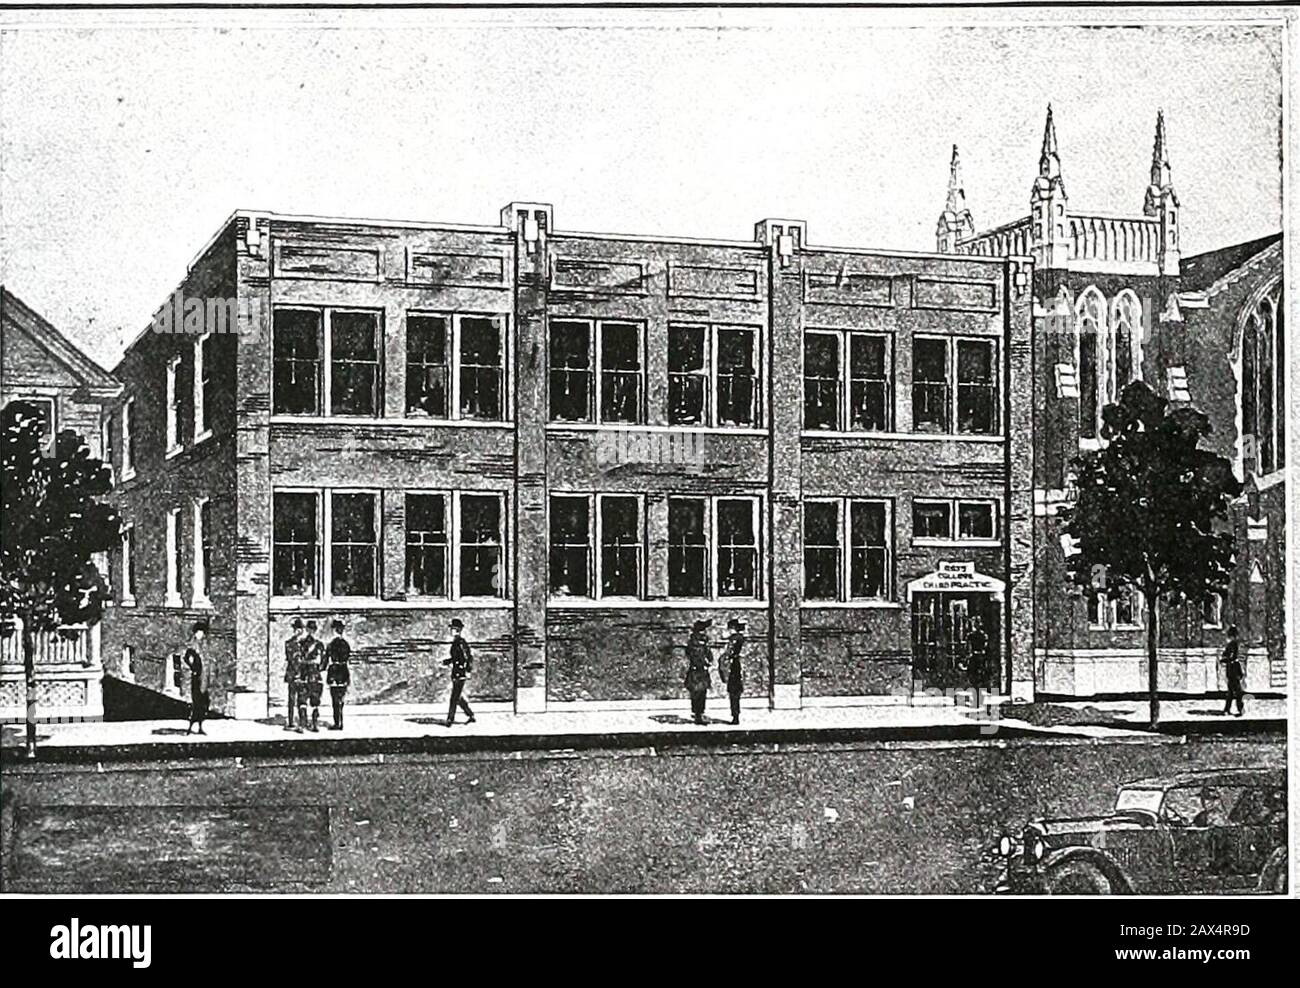 Ross College of Chiropractic . r Ross College of Chiropractic Fort Wayne. Indiana. Our Own Home—Located in Downtown Section THIS large, beautiful and substantial college building onopposite page is the newly constructed addition to ourinstitution. It was designed and planned for this special pur-pose. Therefore, it provides ideal facilities and quarters for the lecture and clinic rooms. The old building contains the business offices and reception room. Il. th.i m,l NOT rented or leased property. THEY ARE ENTIRELYOUR OWN. All of which means that our institution is com-plete in its appointments, Stock Photo